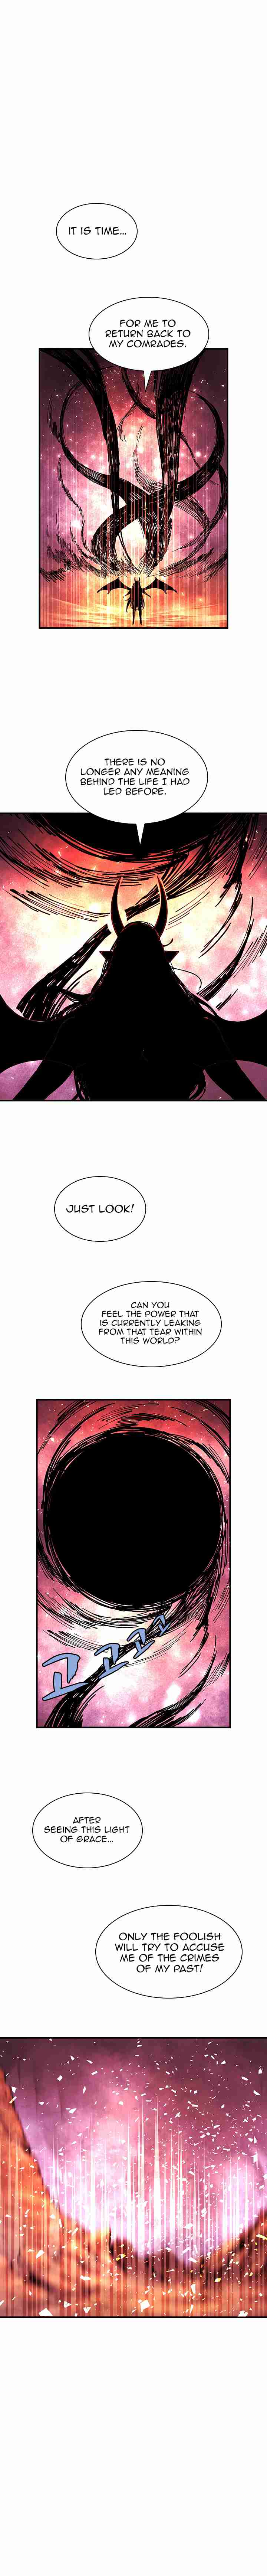 The Dungeon Master Ch. 30